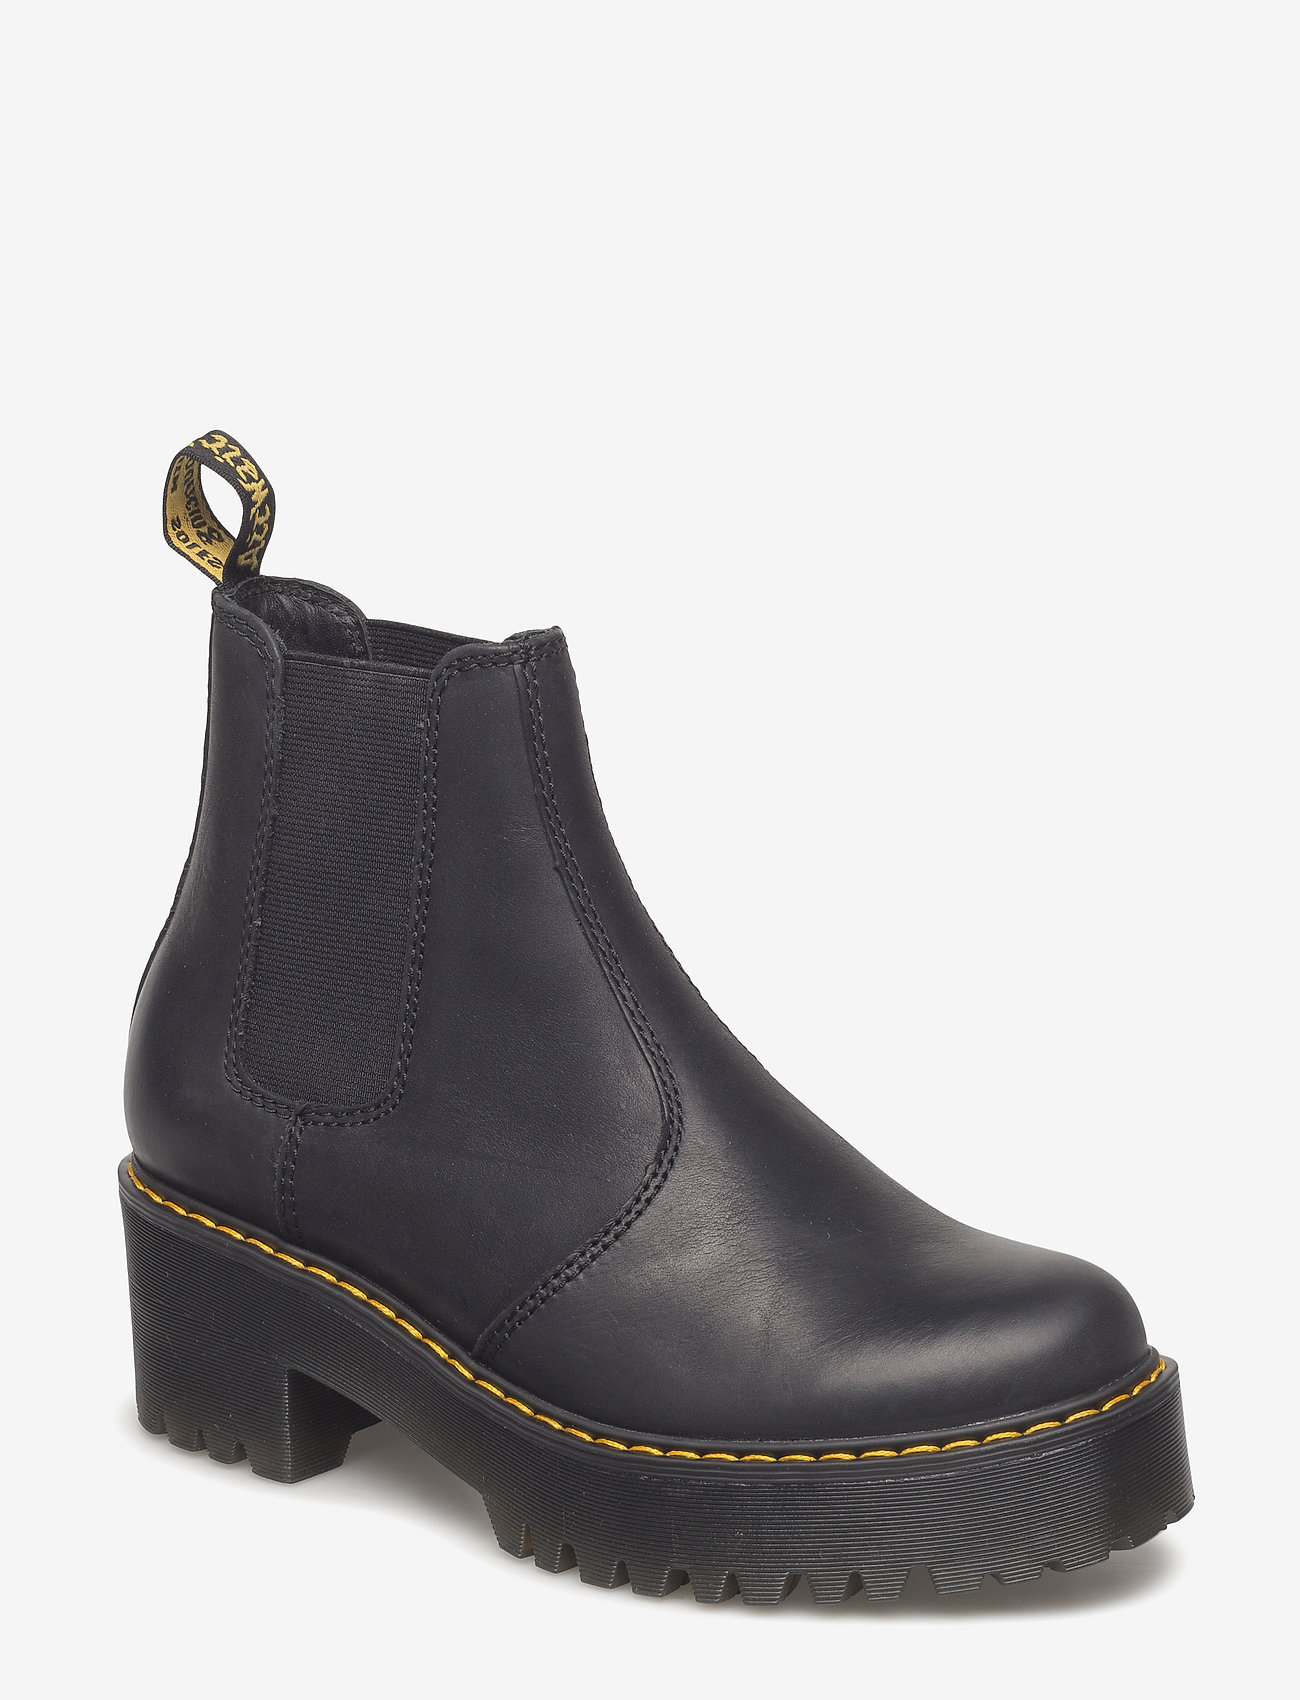 dr martens rometty wyoming